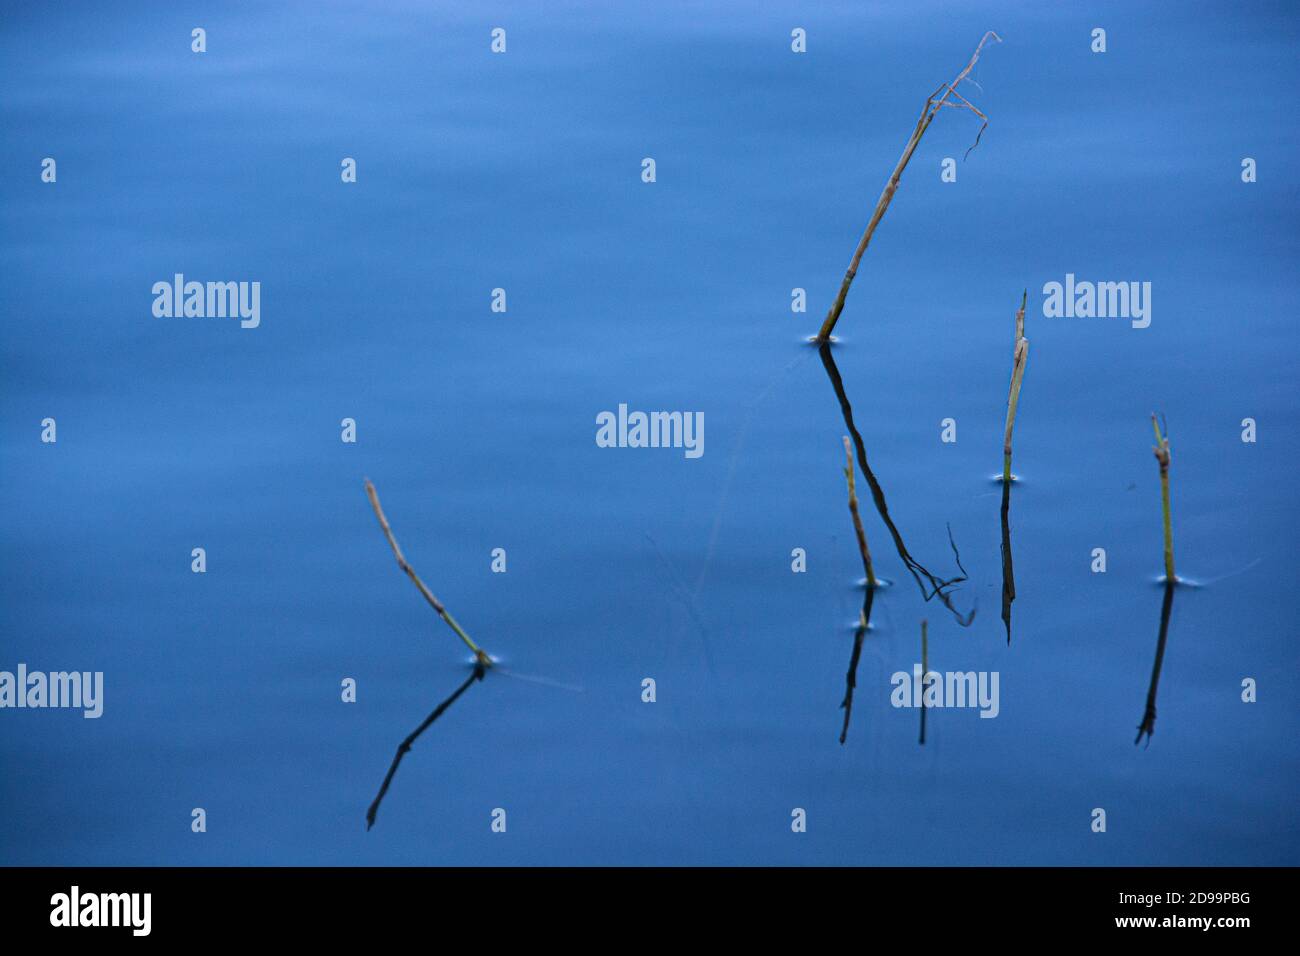 Five twigs jut out of a lake, in the city of Brea, California, USA Stock Photo